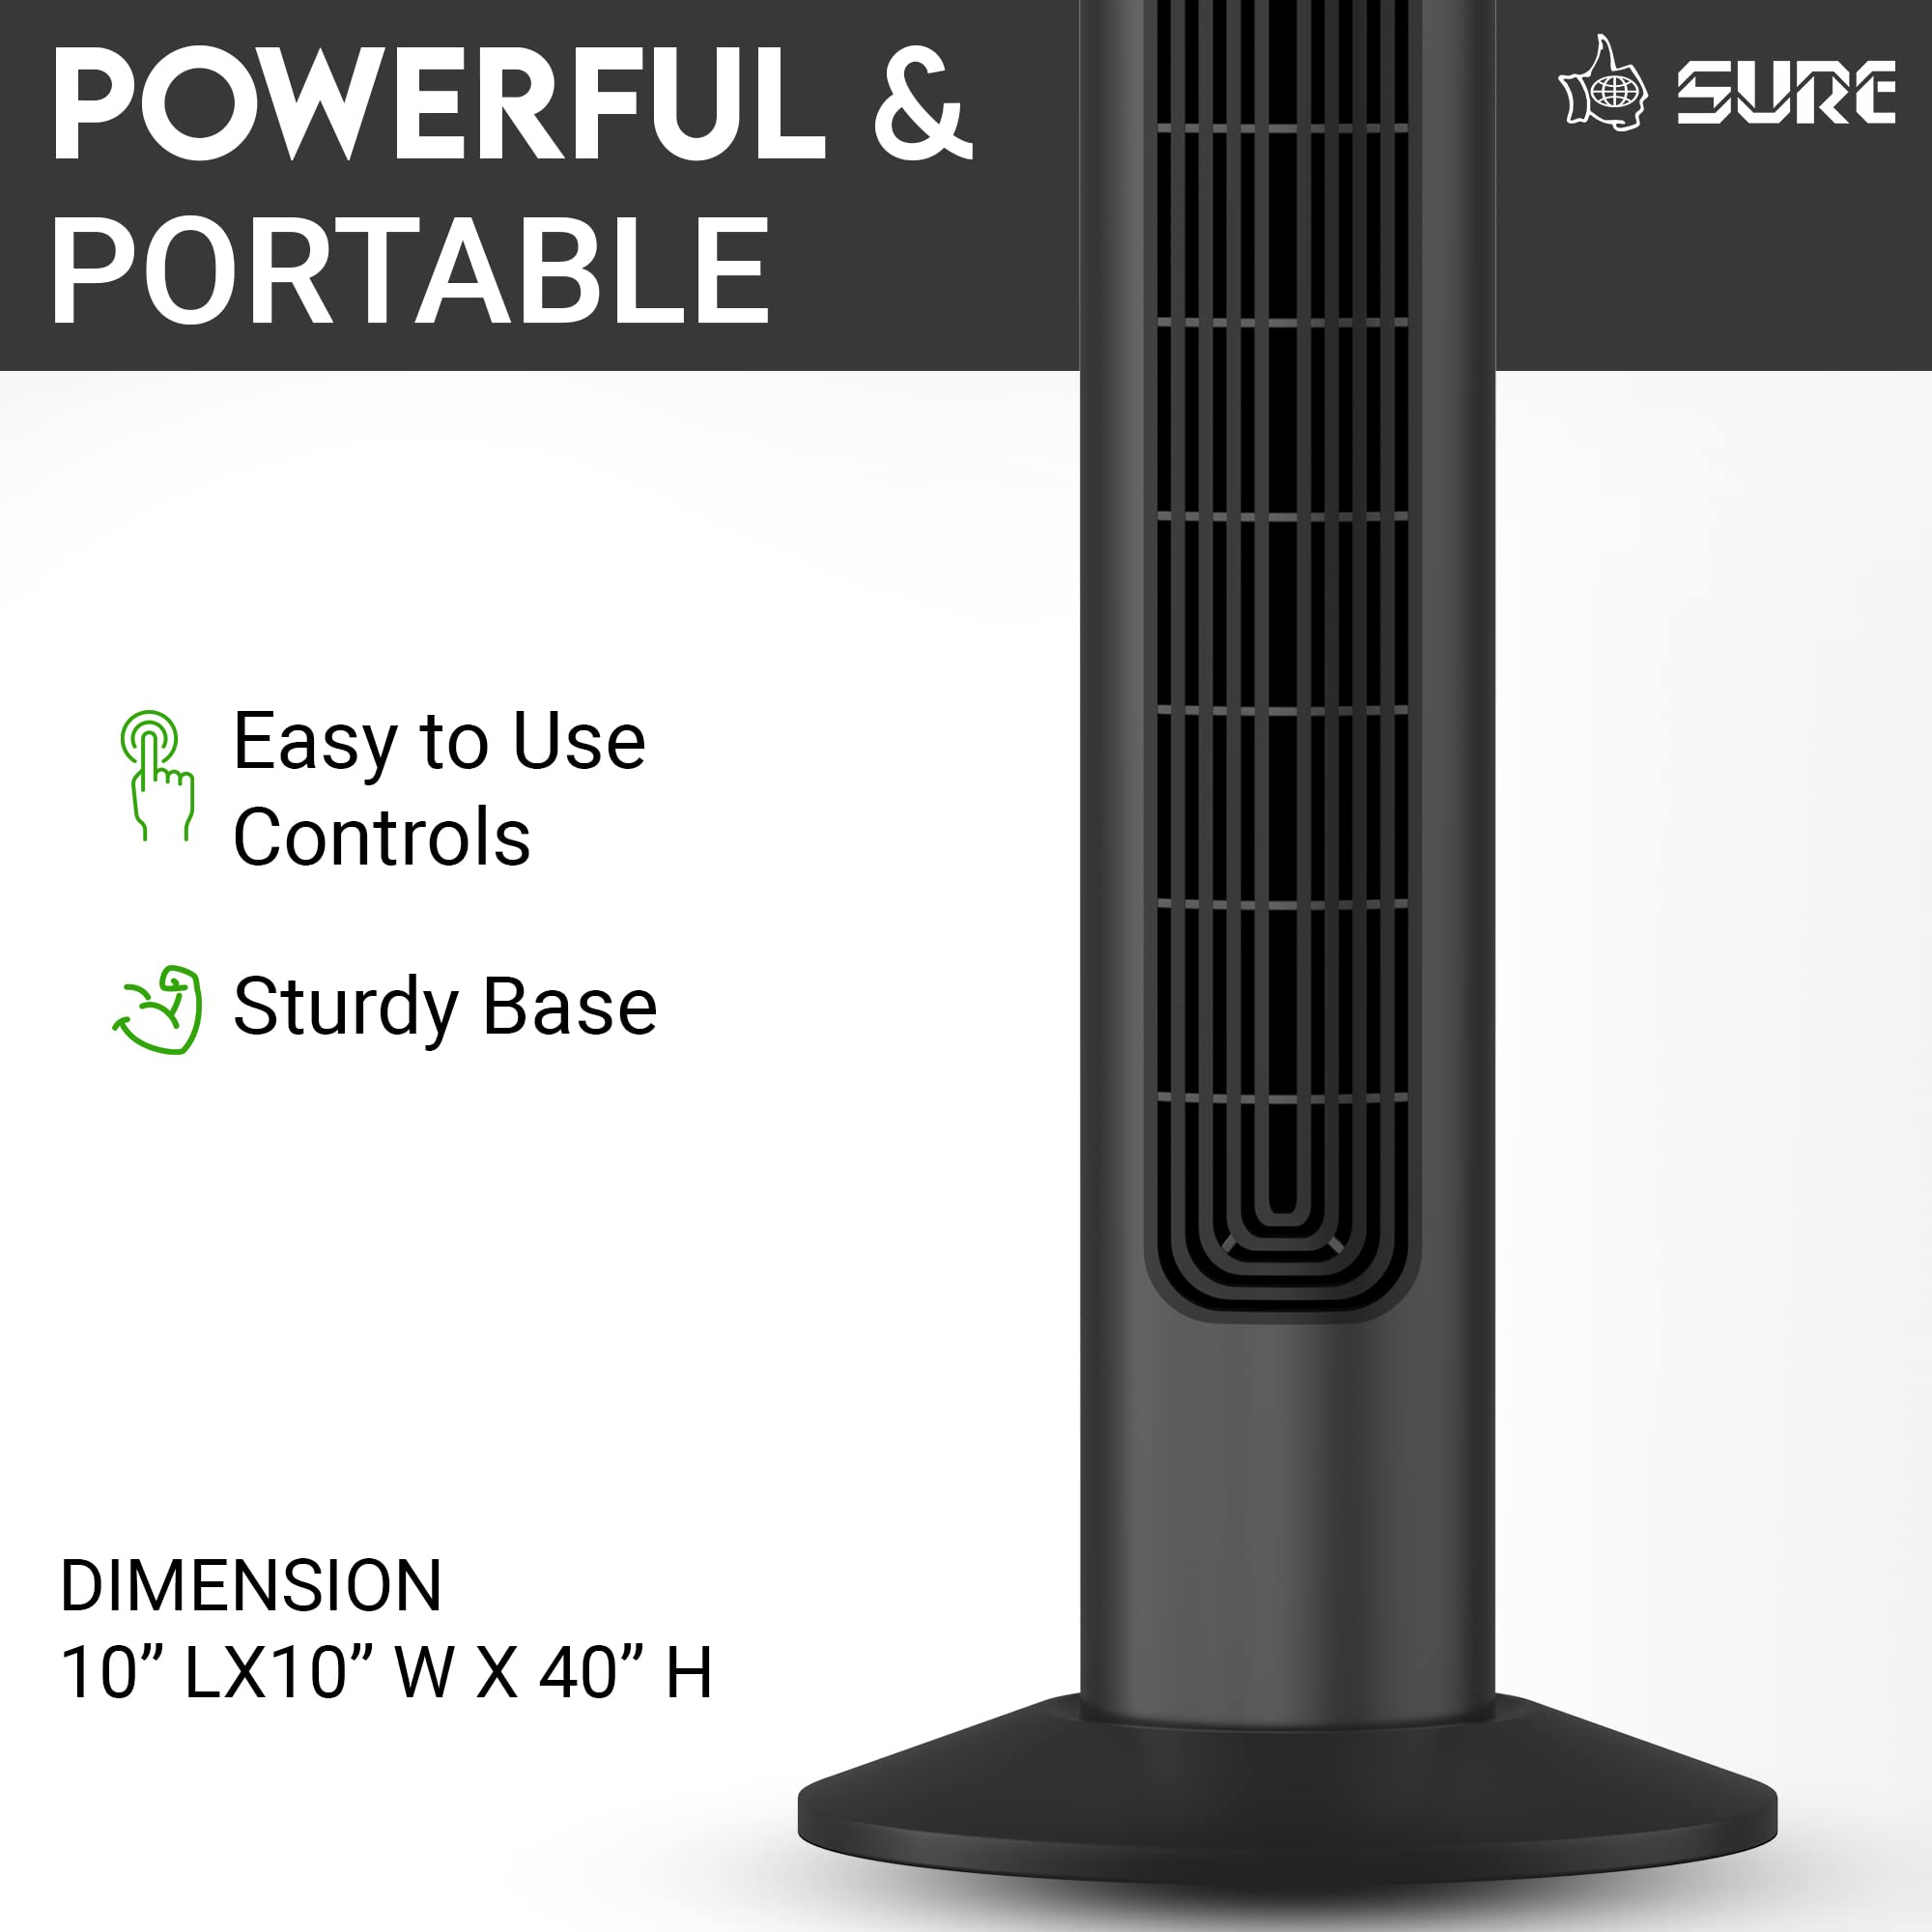 Sure Tower Fan with Remote Control, Bladeless Powerful with 3 Speeds, Timer Function, Standing Oscillating Fan for Home, Bedroom & Office, Black شور تعمل على كهرباء- مراوح ارضيه